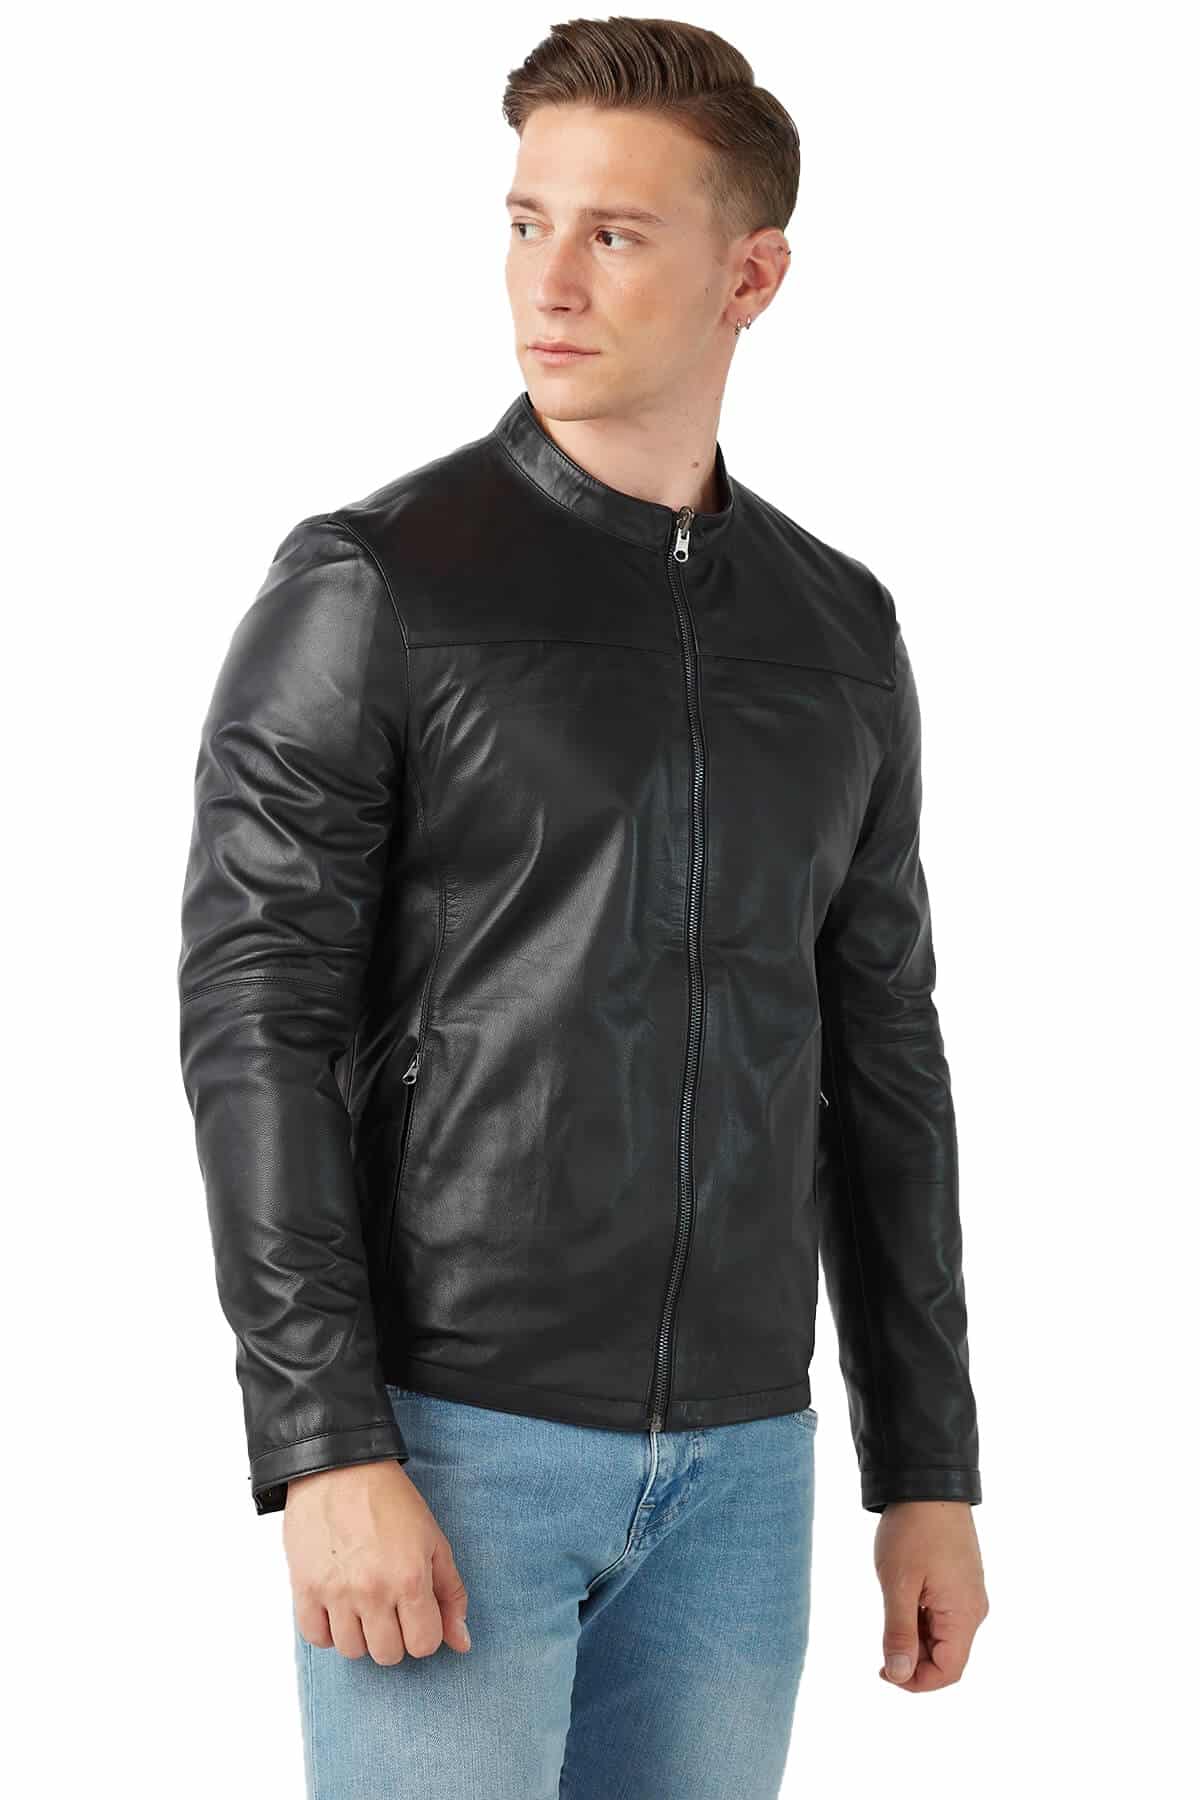 Men's 100 % Real Black Leather Double Sided Gerino Jacket